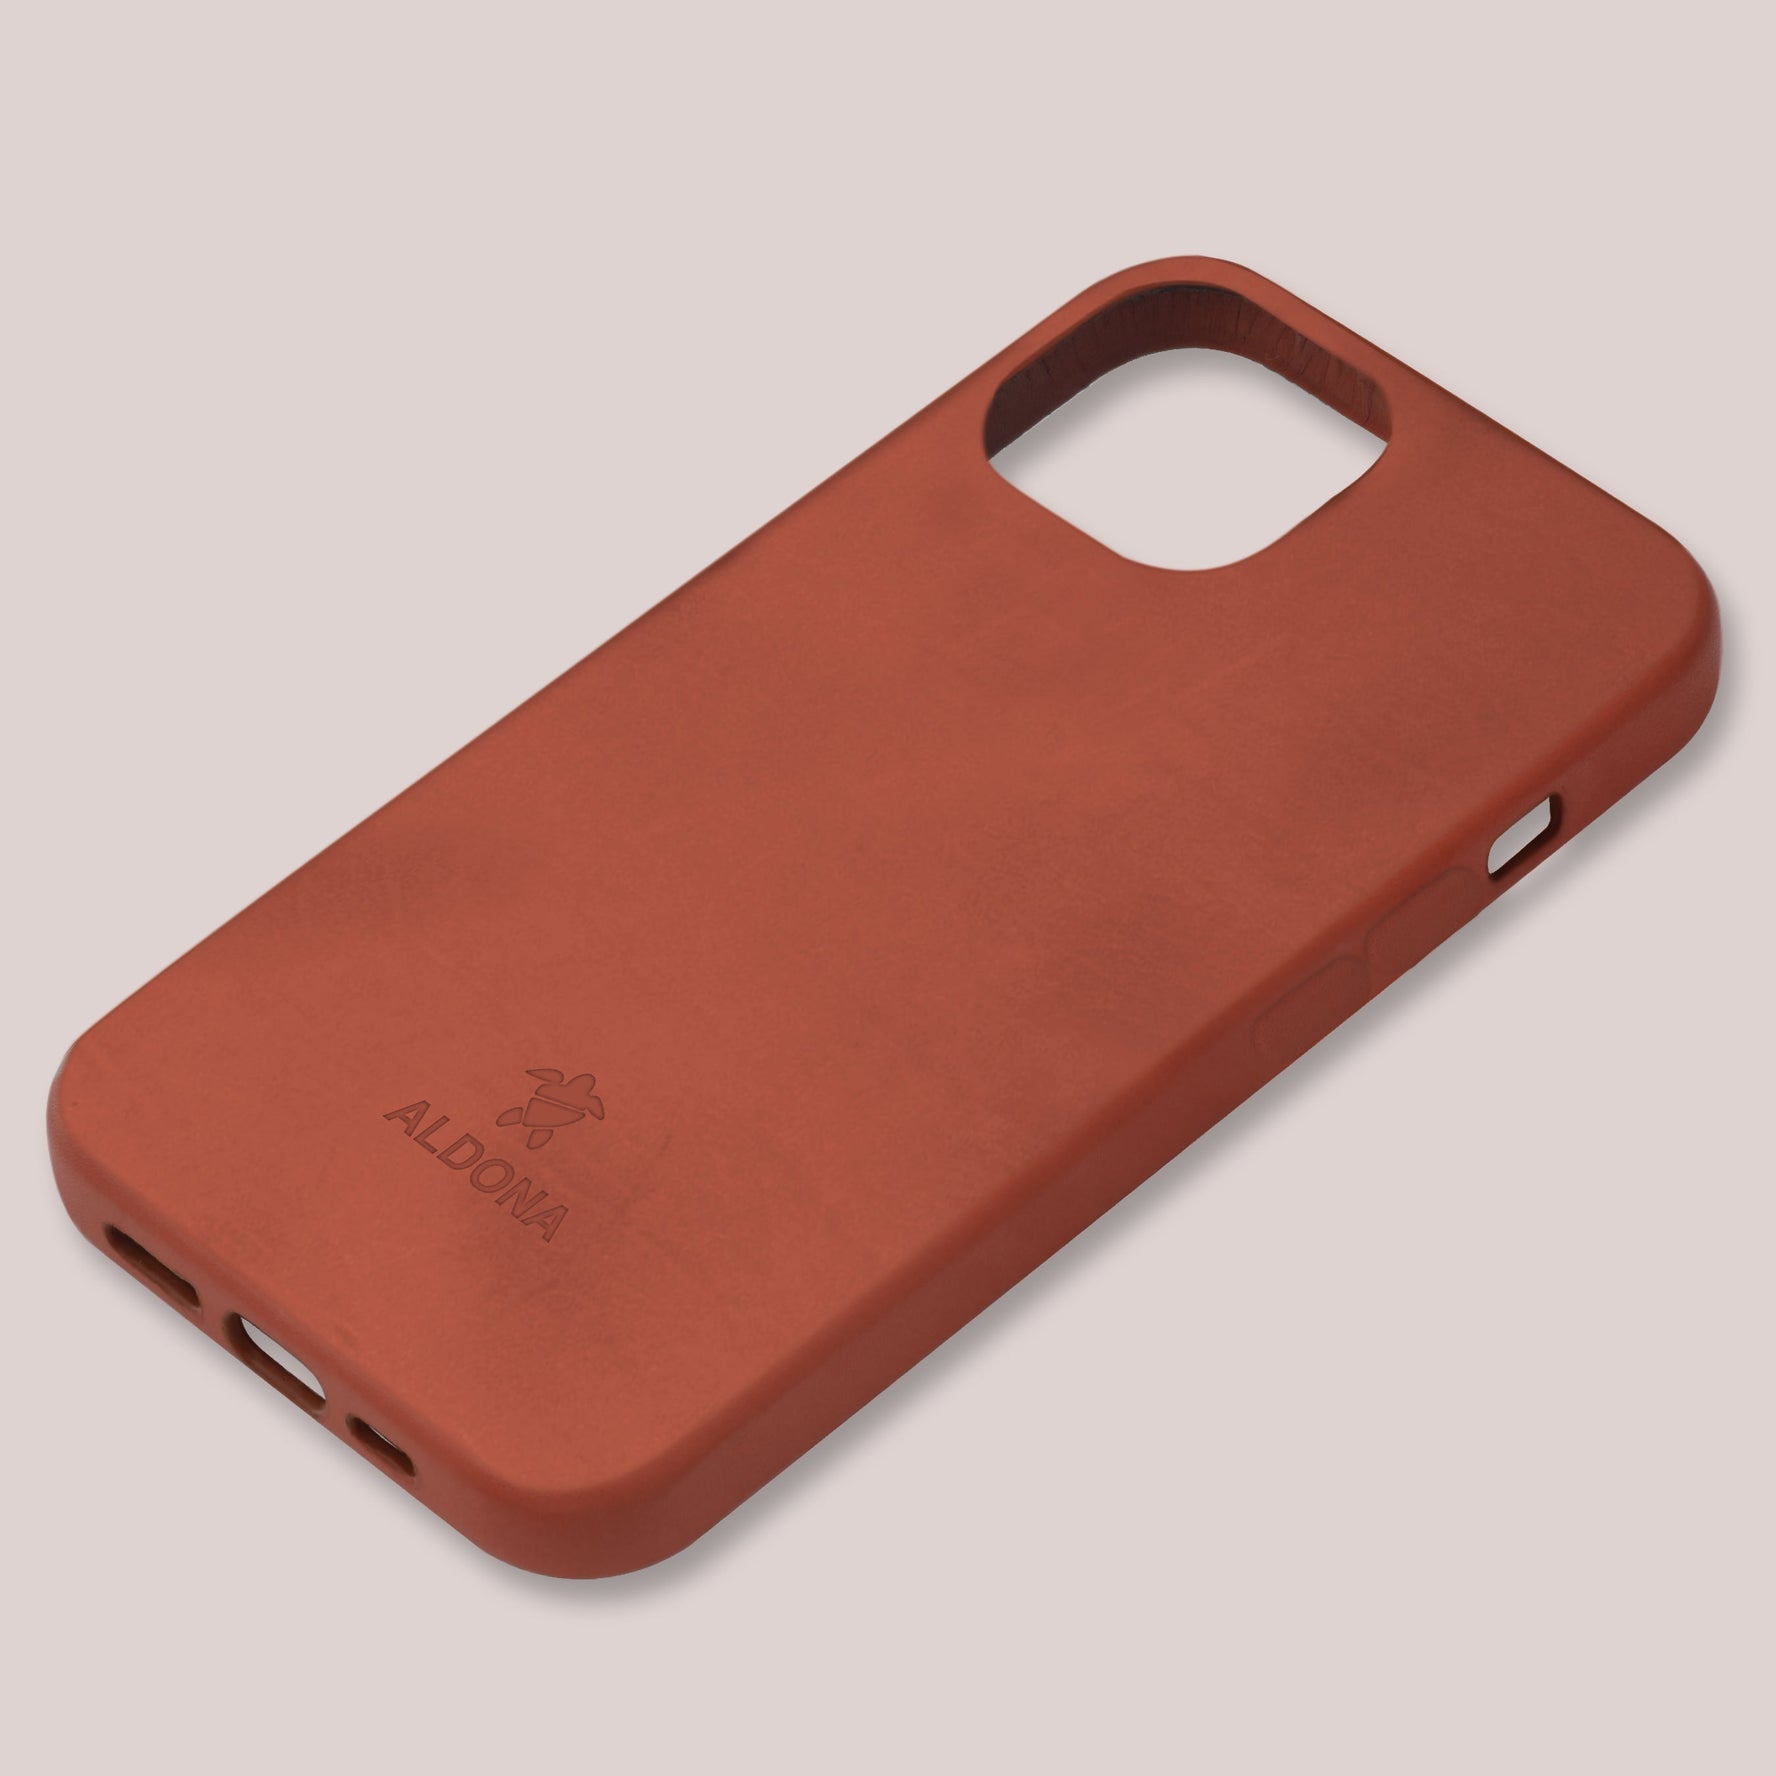 Kalon Case for iPhone 13 Mini with MagSafe Compatibility - Cognac